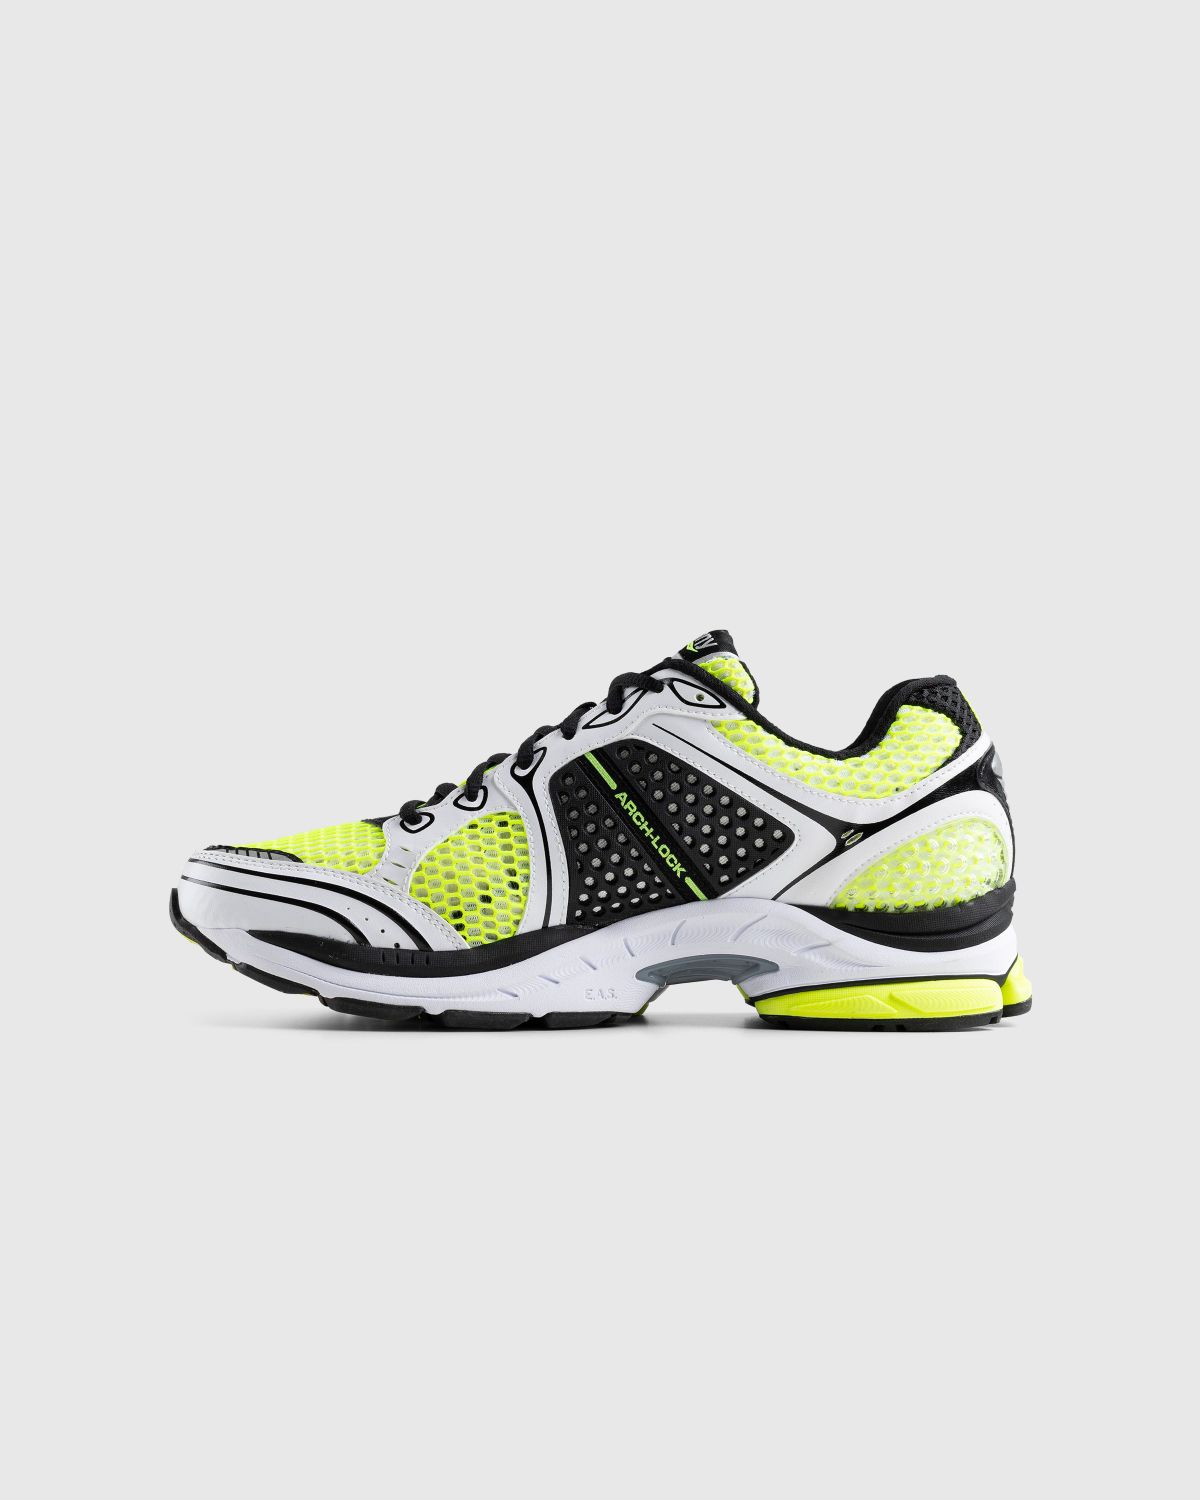 Saucony – ProGrid Triumph 4 Yellow/Silver - Sneakers - Yellow - Image 2